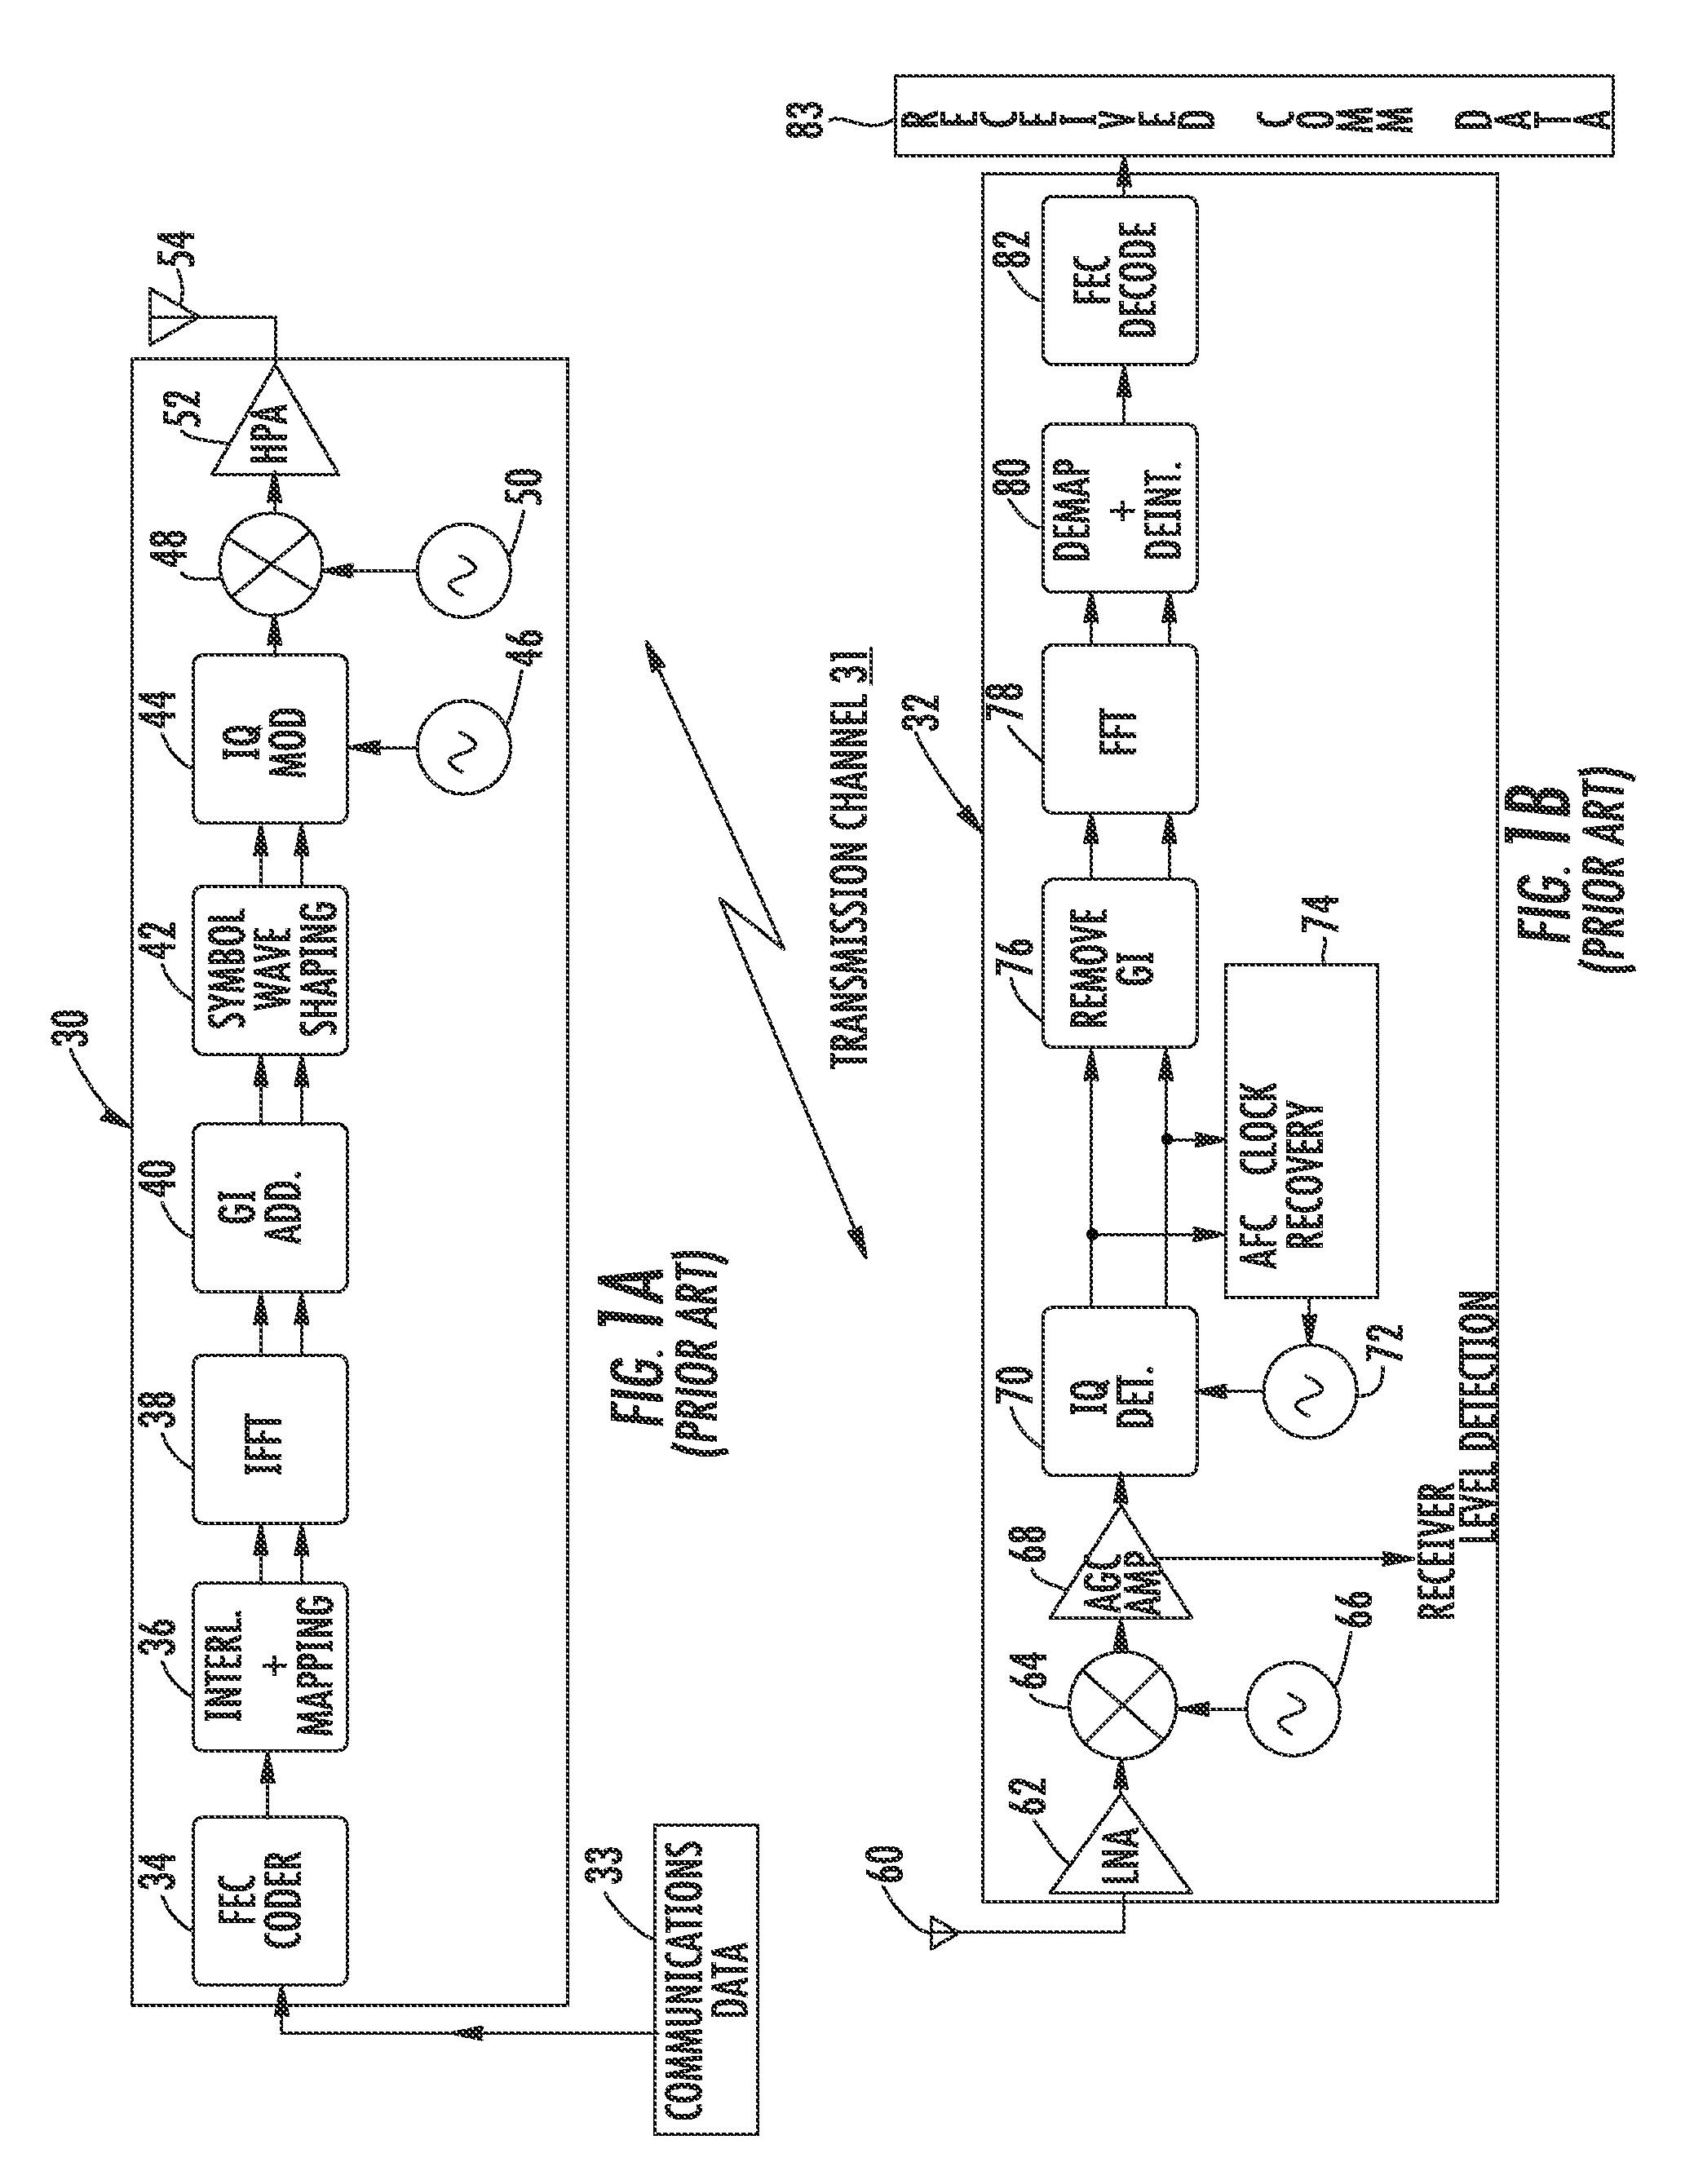 Orthogonal frequency division multiplexing (OFDM) communications device and method that incorporates low papr preamble with circuit for measuring frequency response of the communications channel